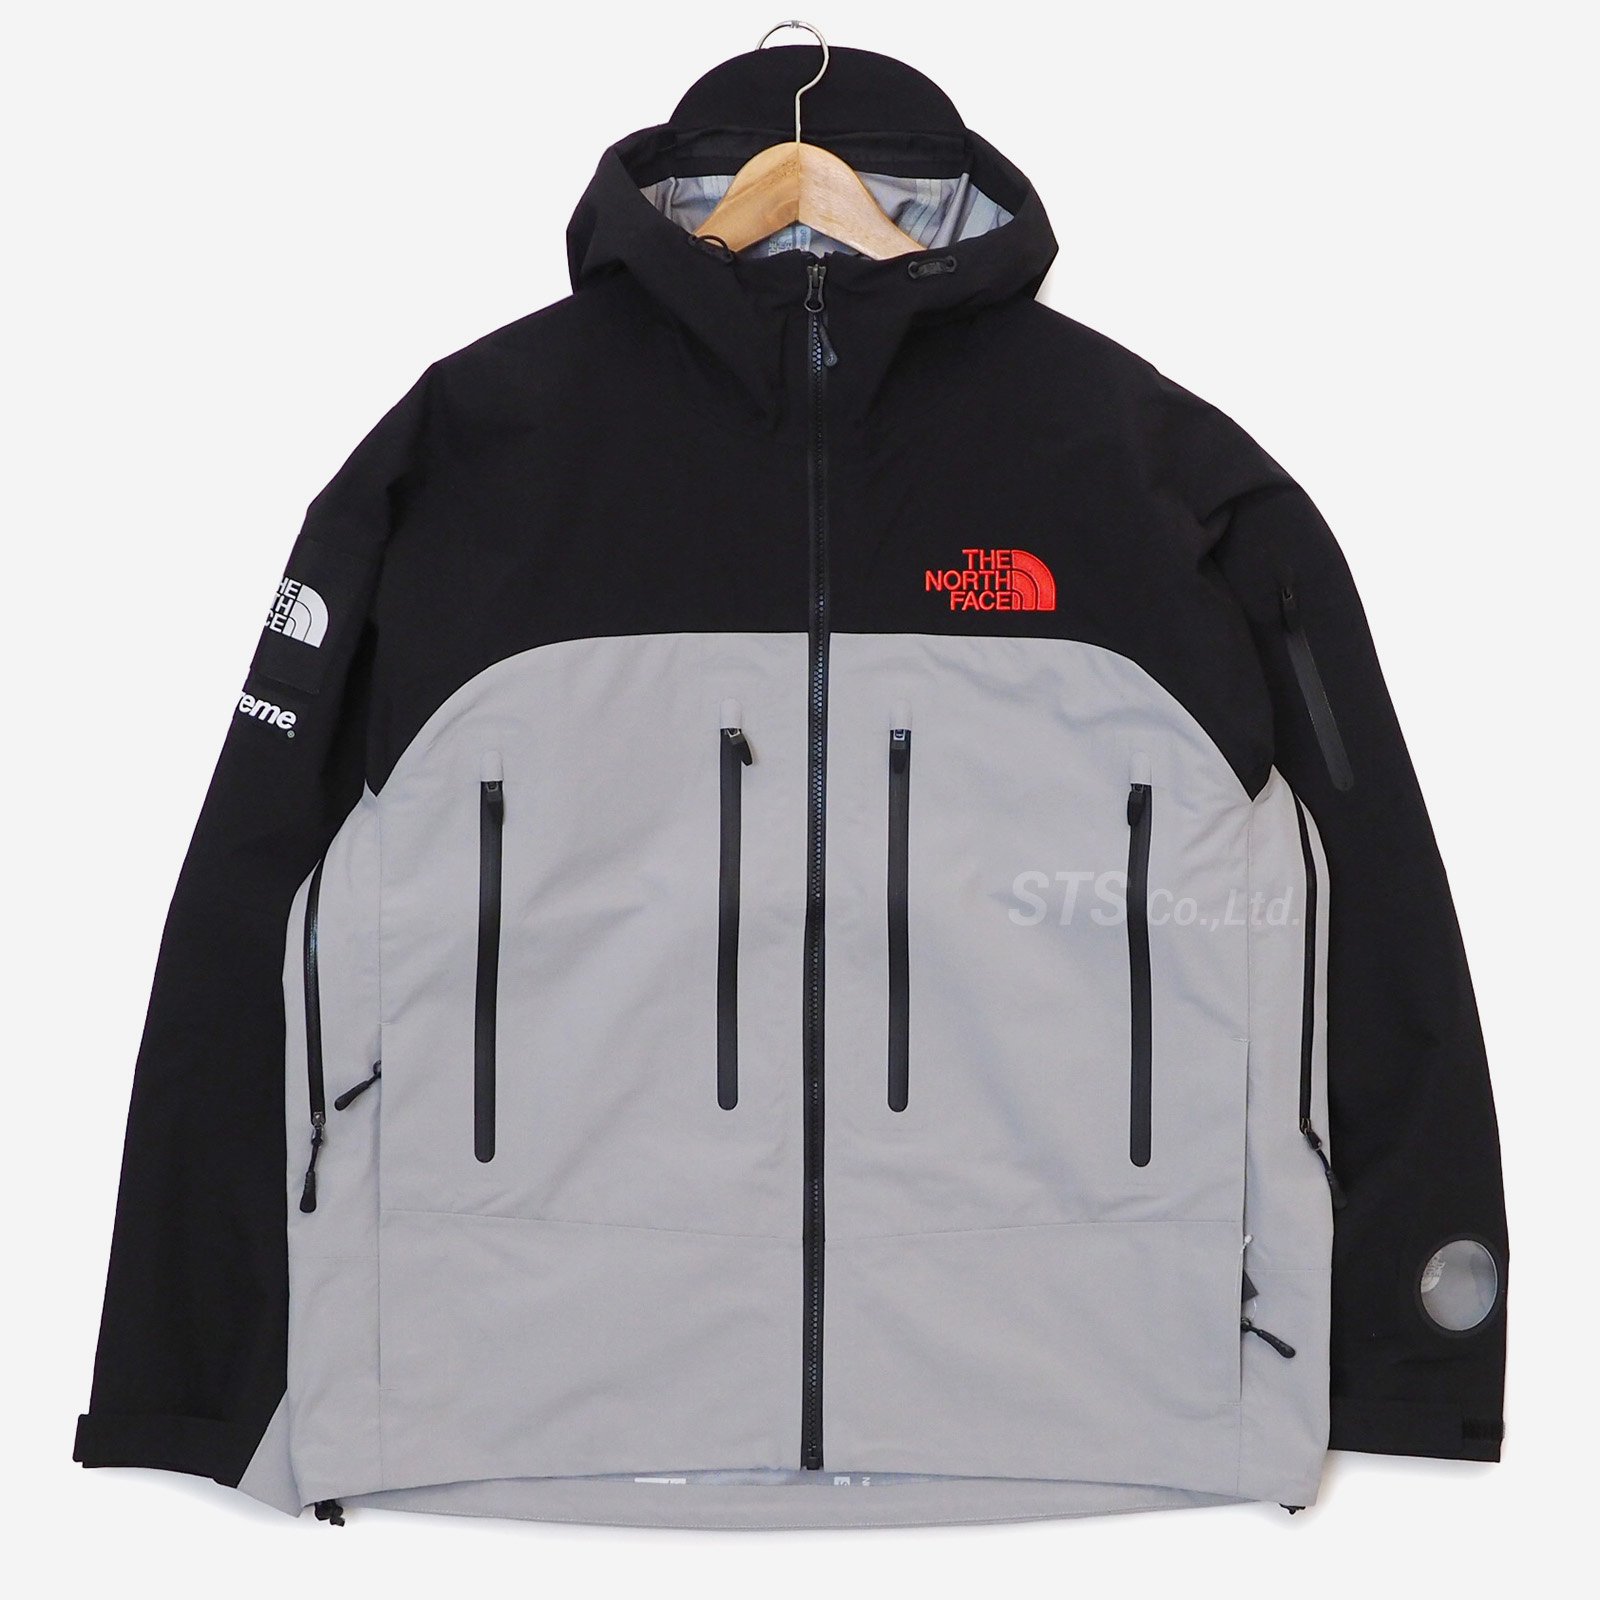 Supreme / The North Face Shell Jacket-www.coumes-spring.co.uk